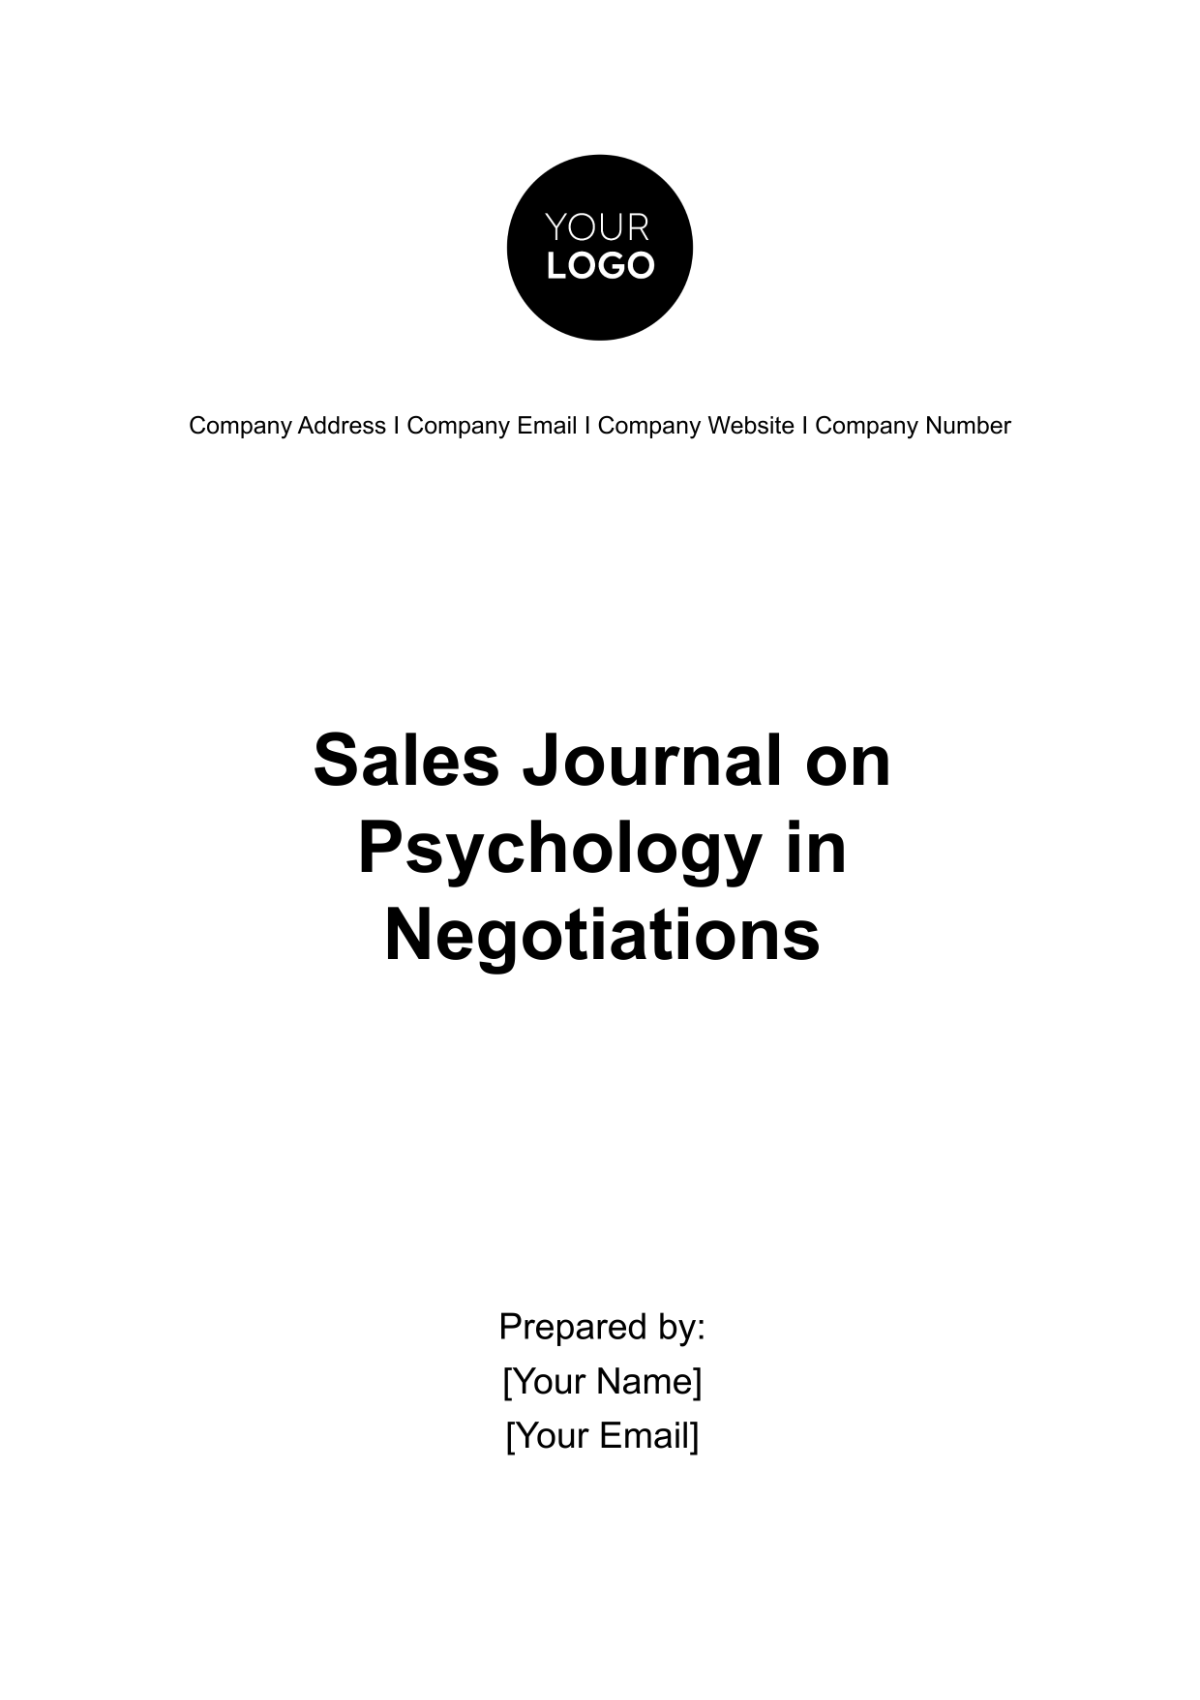 Sales Journal on Psychology in Negotiations Template